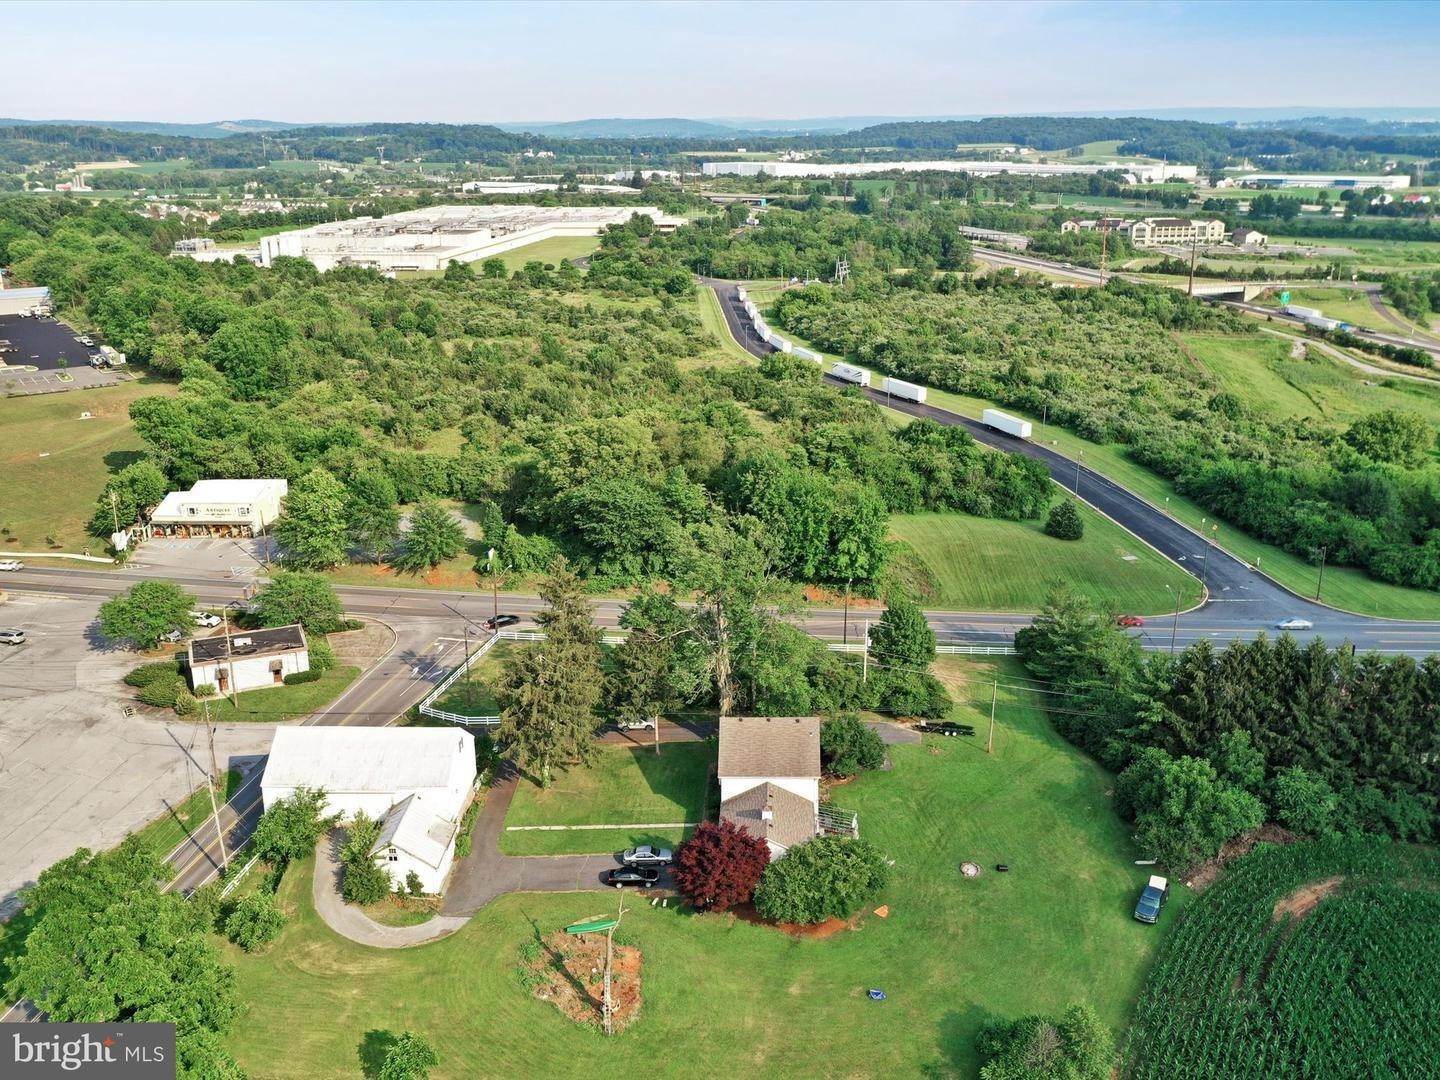 11. Land for Sale at 20 HILL / RT. 272 Road Denver, Pennsylvania 17517 United States